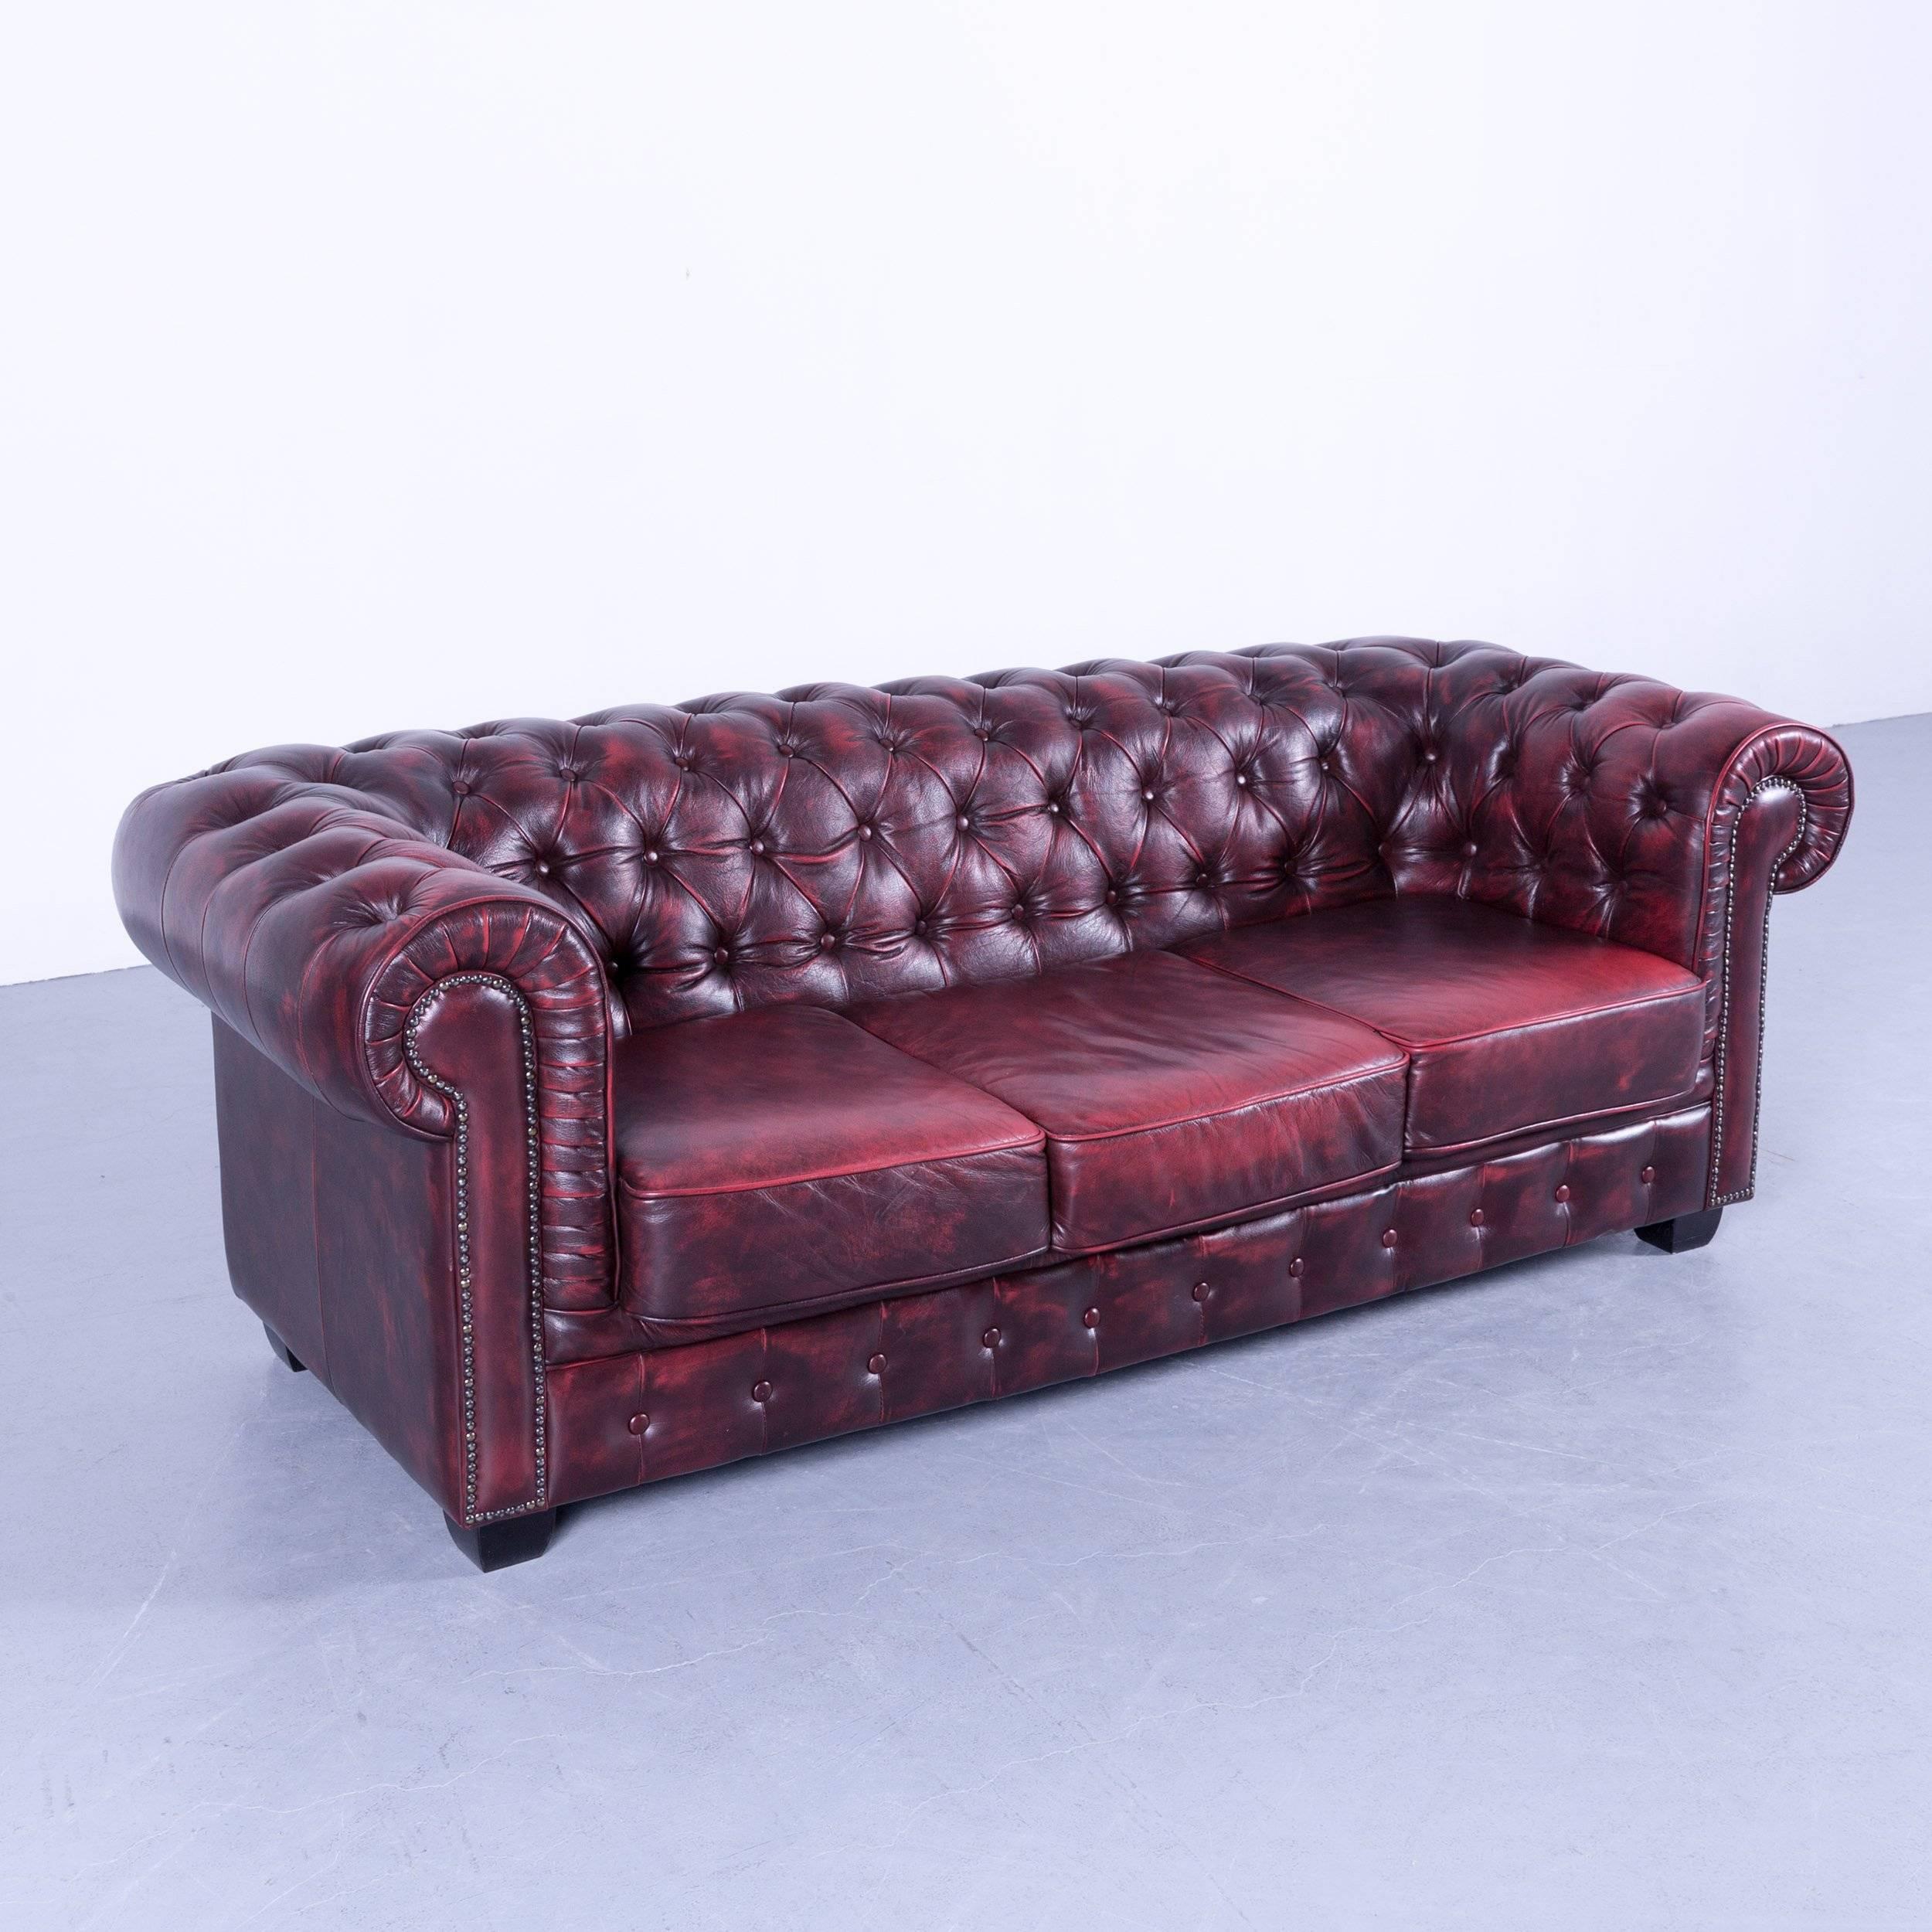 Chesterfield sofa oxblood red three-seat couch vintage retro handmade rivets.